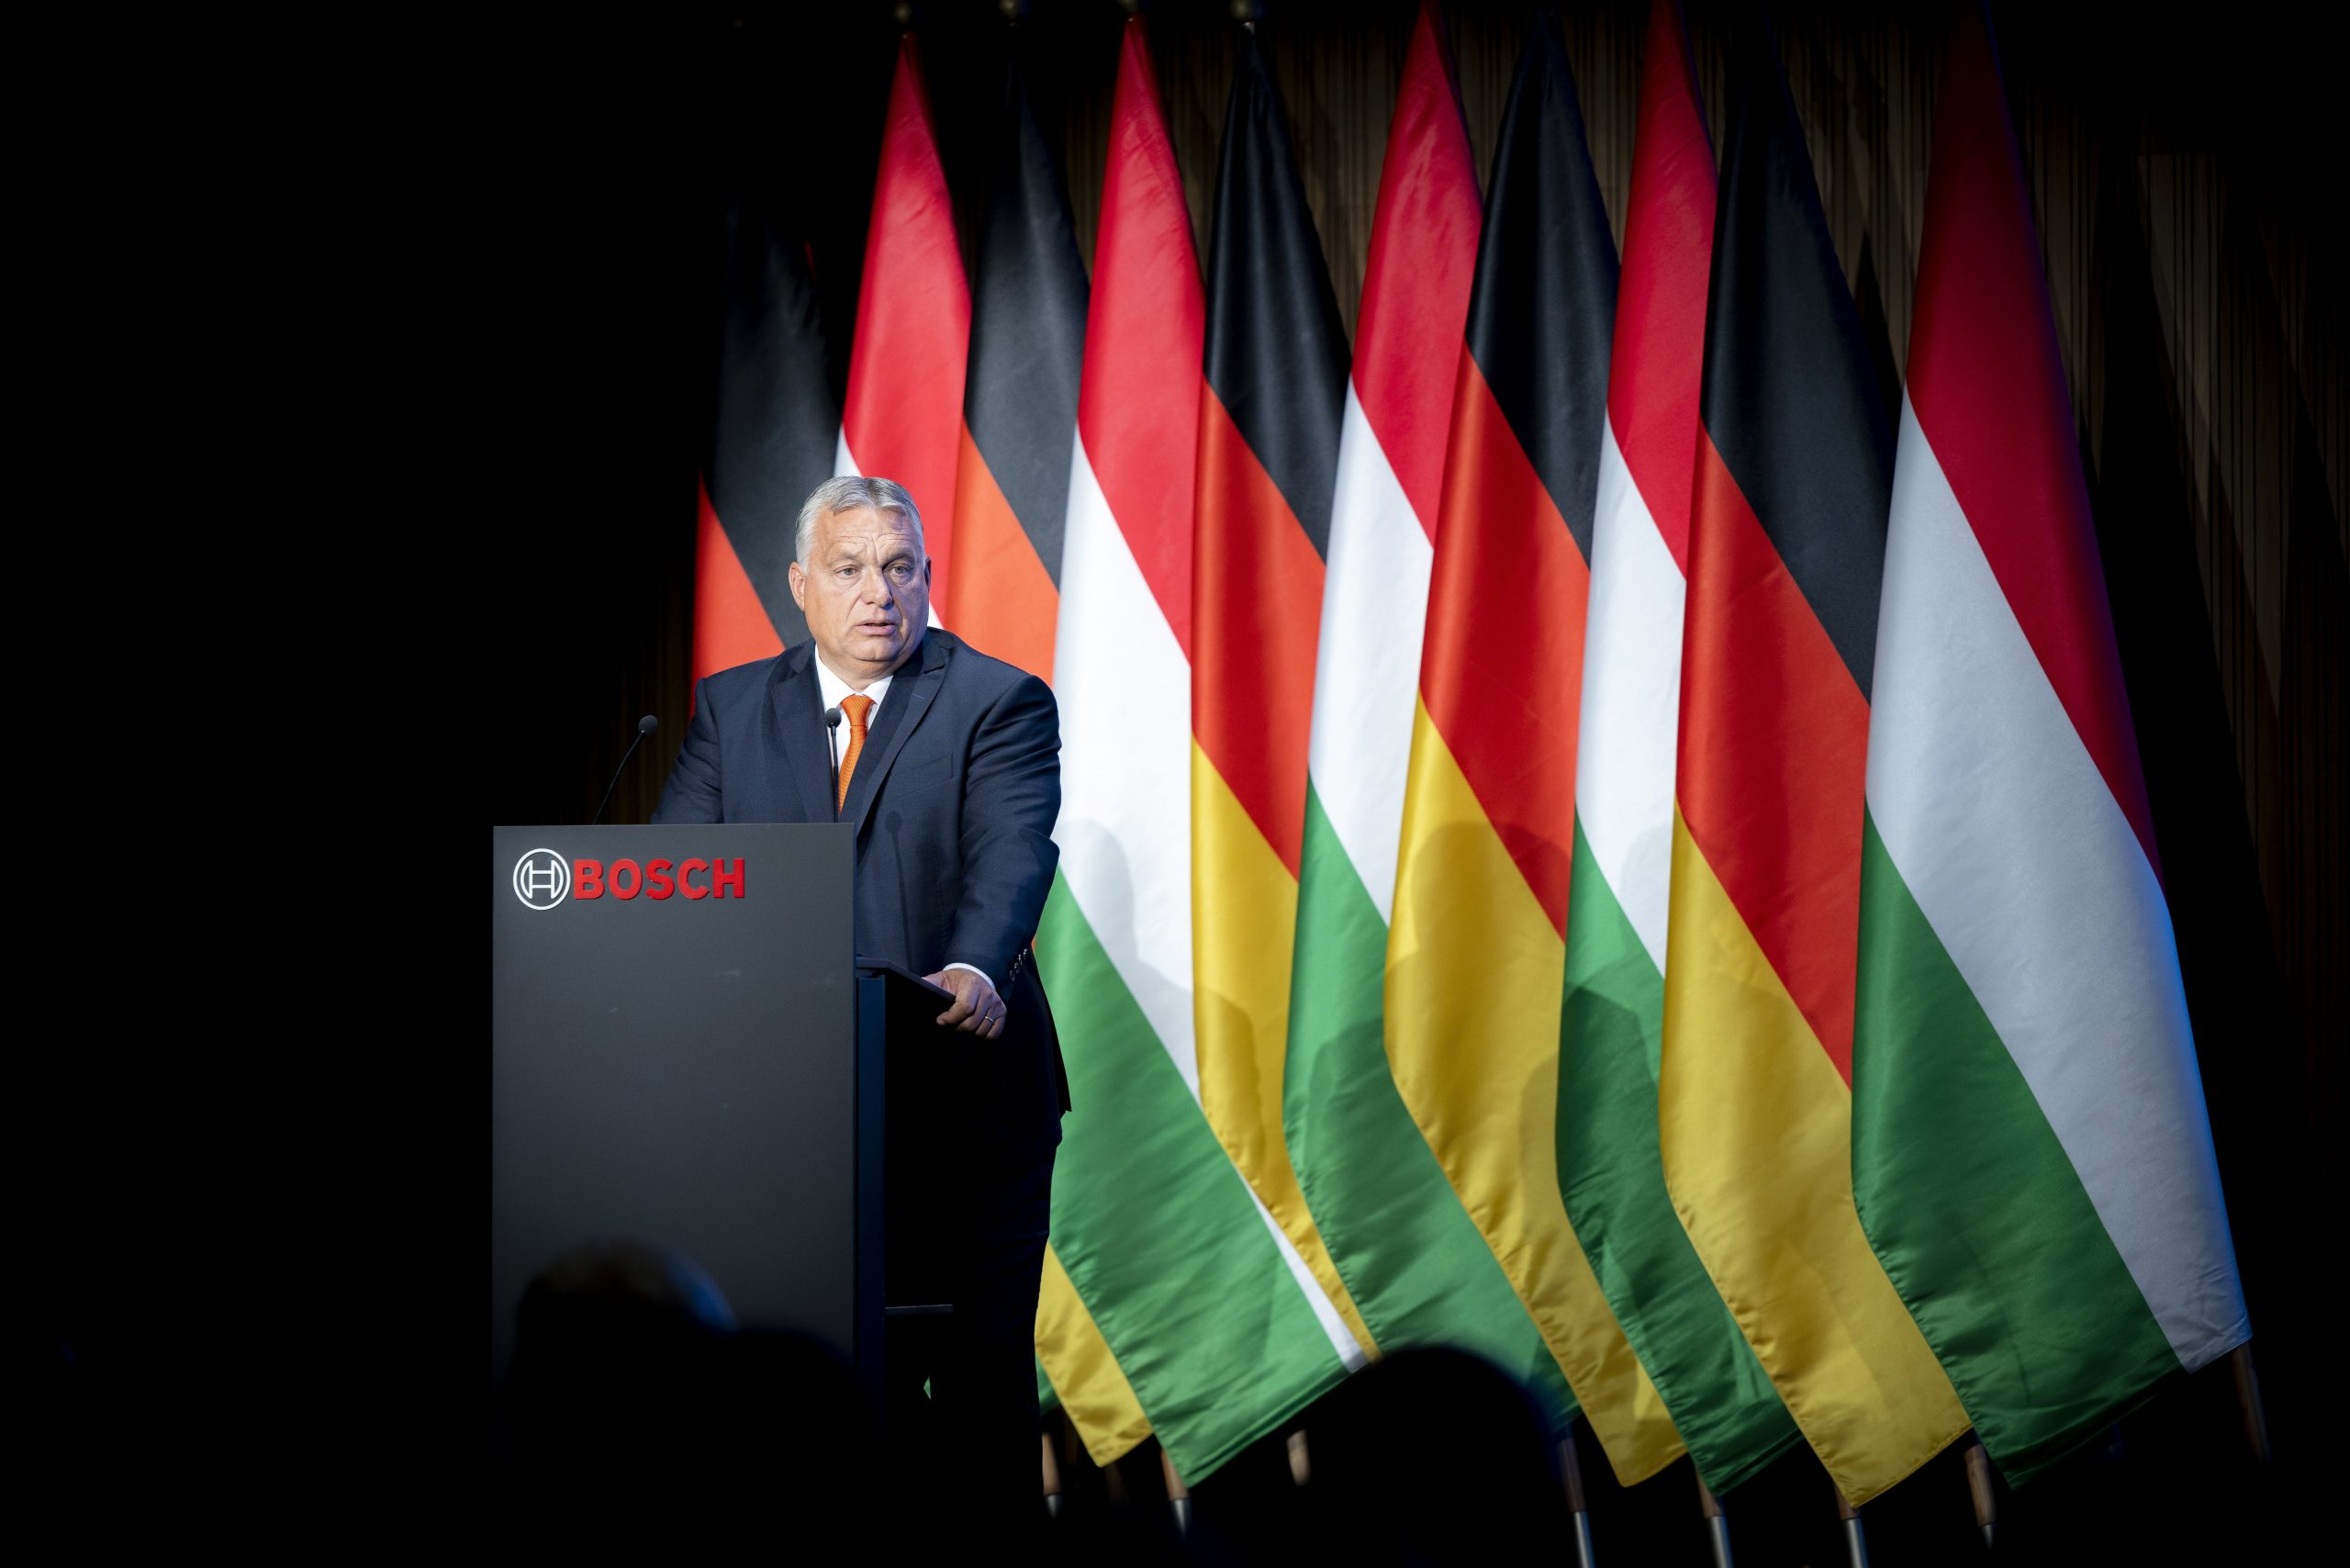 War and Sanctions Can Cause Energy Shortage, Viktor Orbán Warns